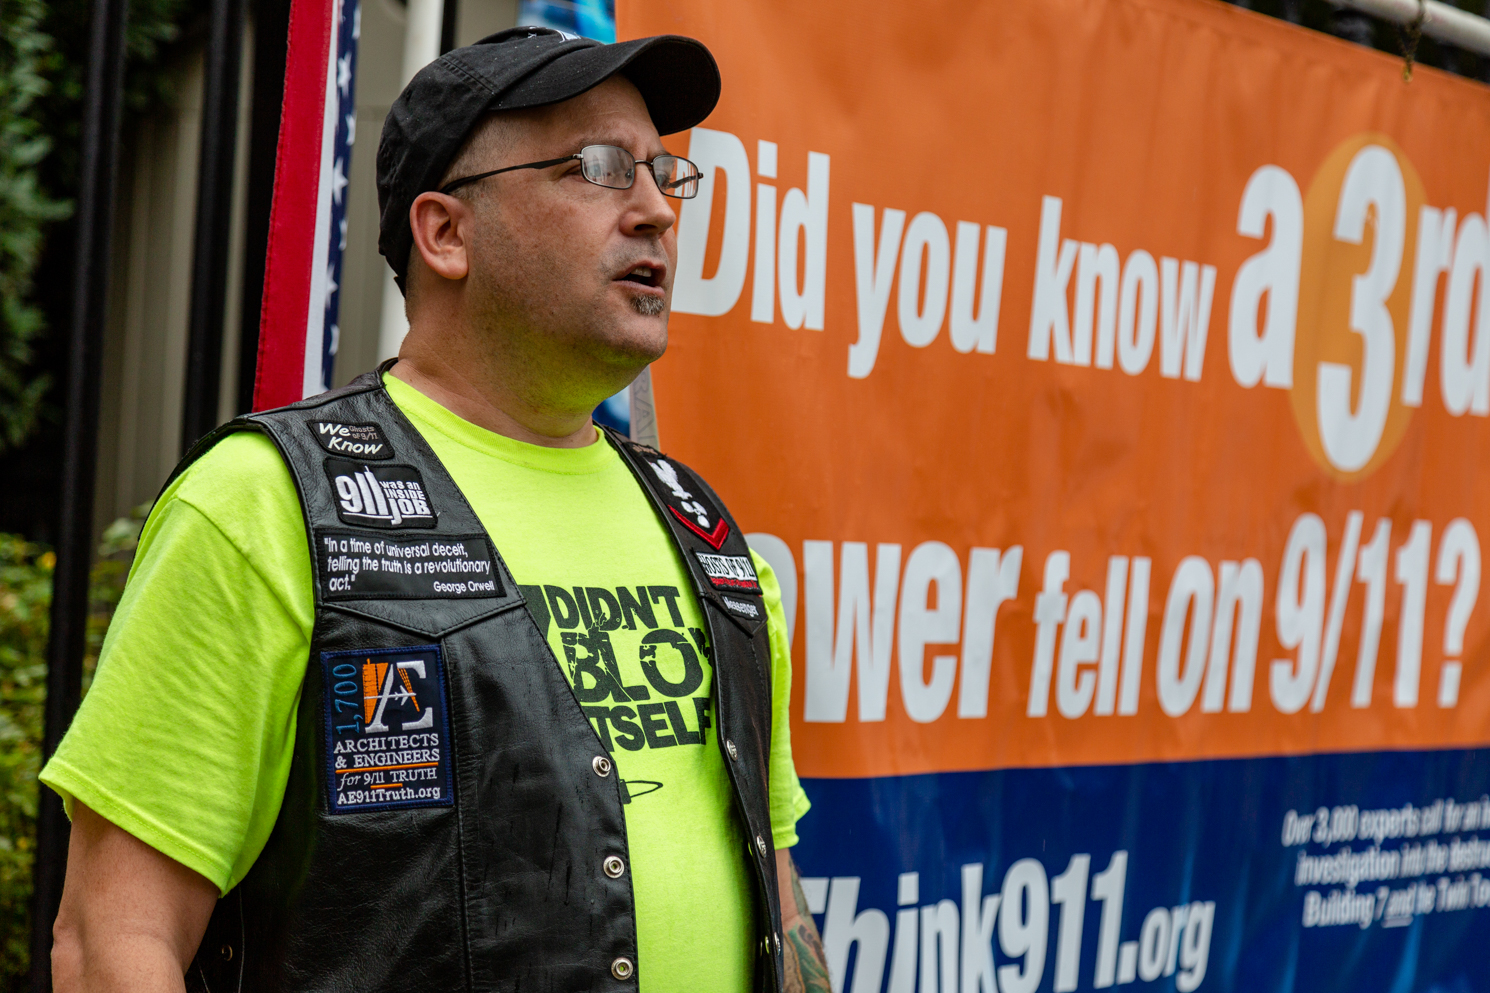 A member of the conspiracy group Architects and Engineers for 9/11 Truth, dressed in a neon-green t-shirt and a black leather vest, stands next to a poster that says “Do you know a third tower fell on 9/11?”